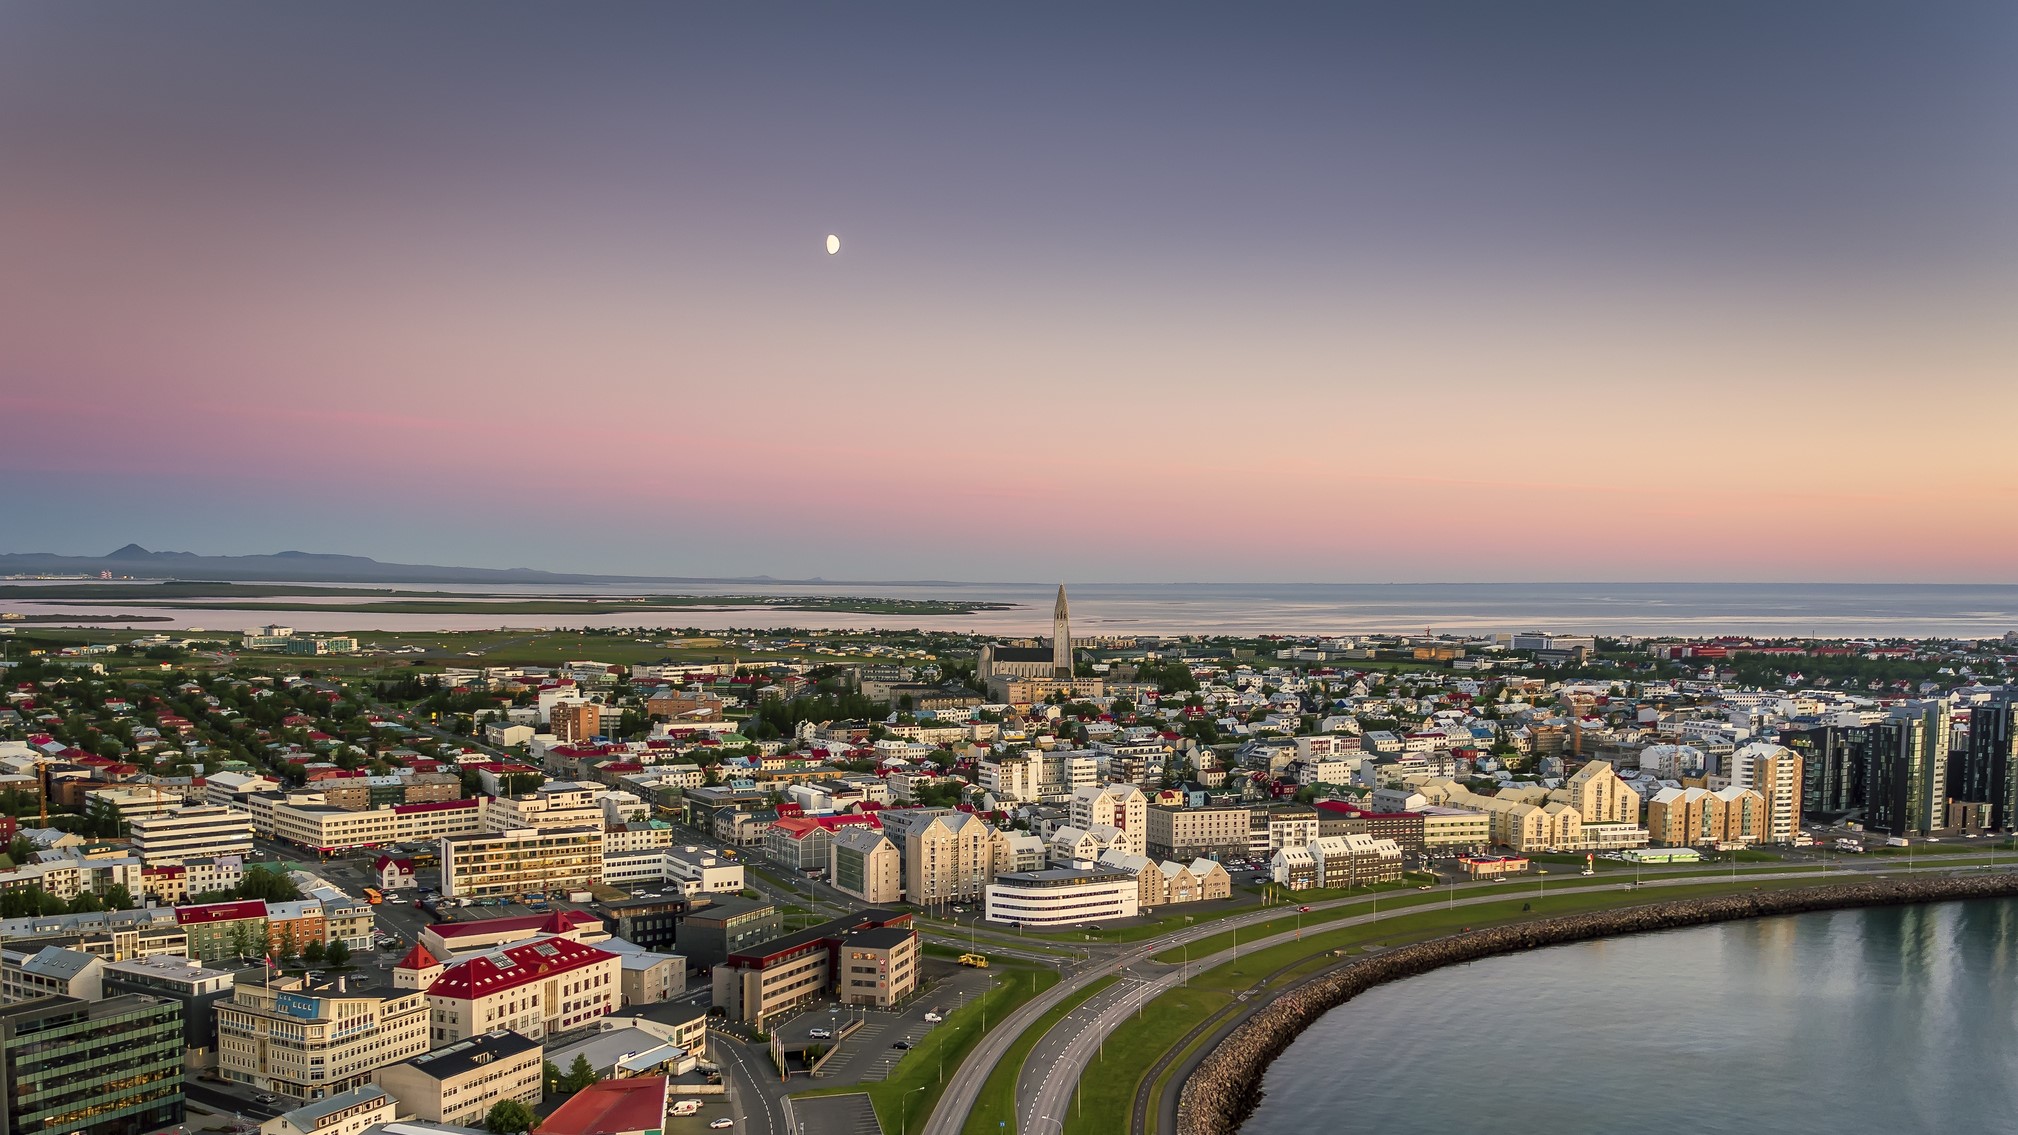 Panoramic view of Reykjavik in the summertime, Midnight sun. This image is shot using a drone.